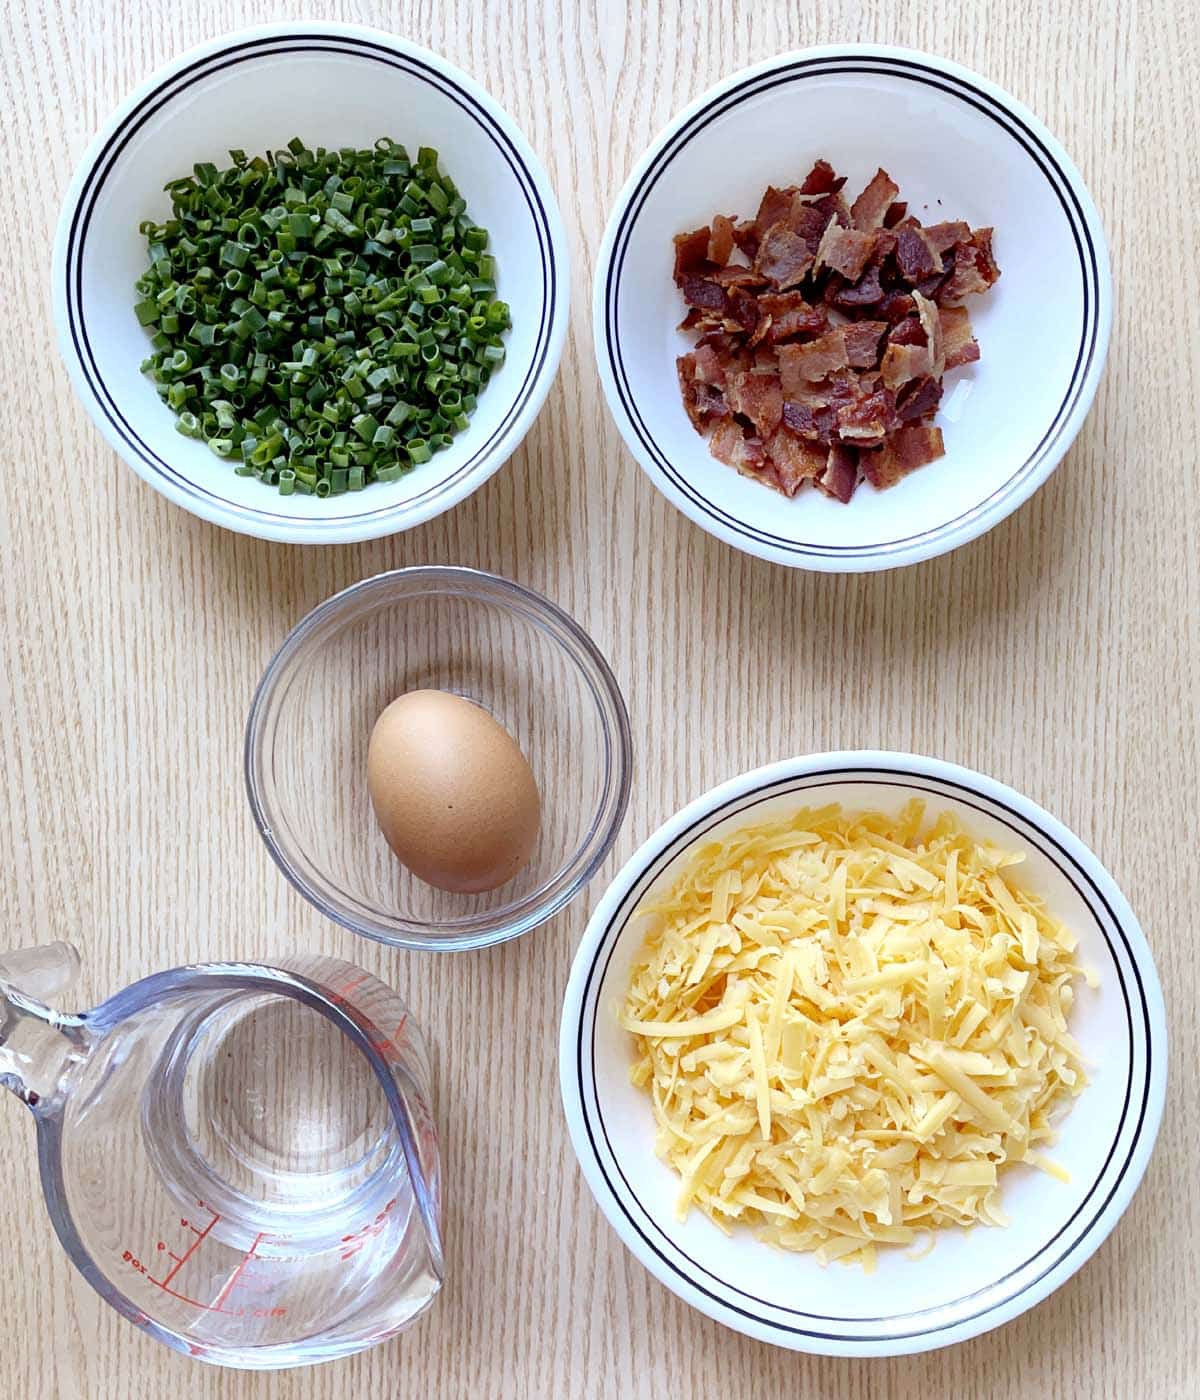 Bowls containing chopped green onions, crumbled cooked bacon, grated cheddar cheese, an egg, and a measuring cup with water.